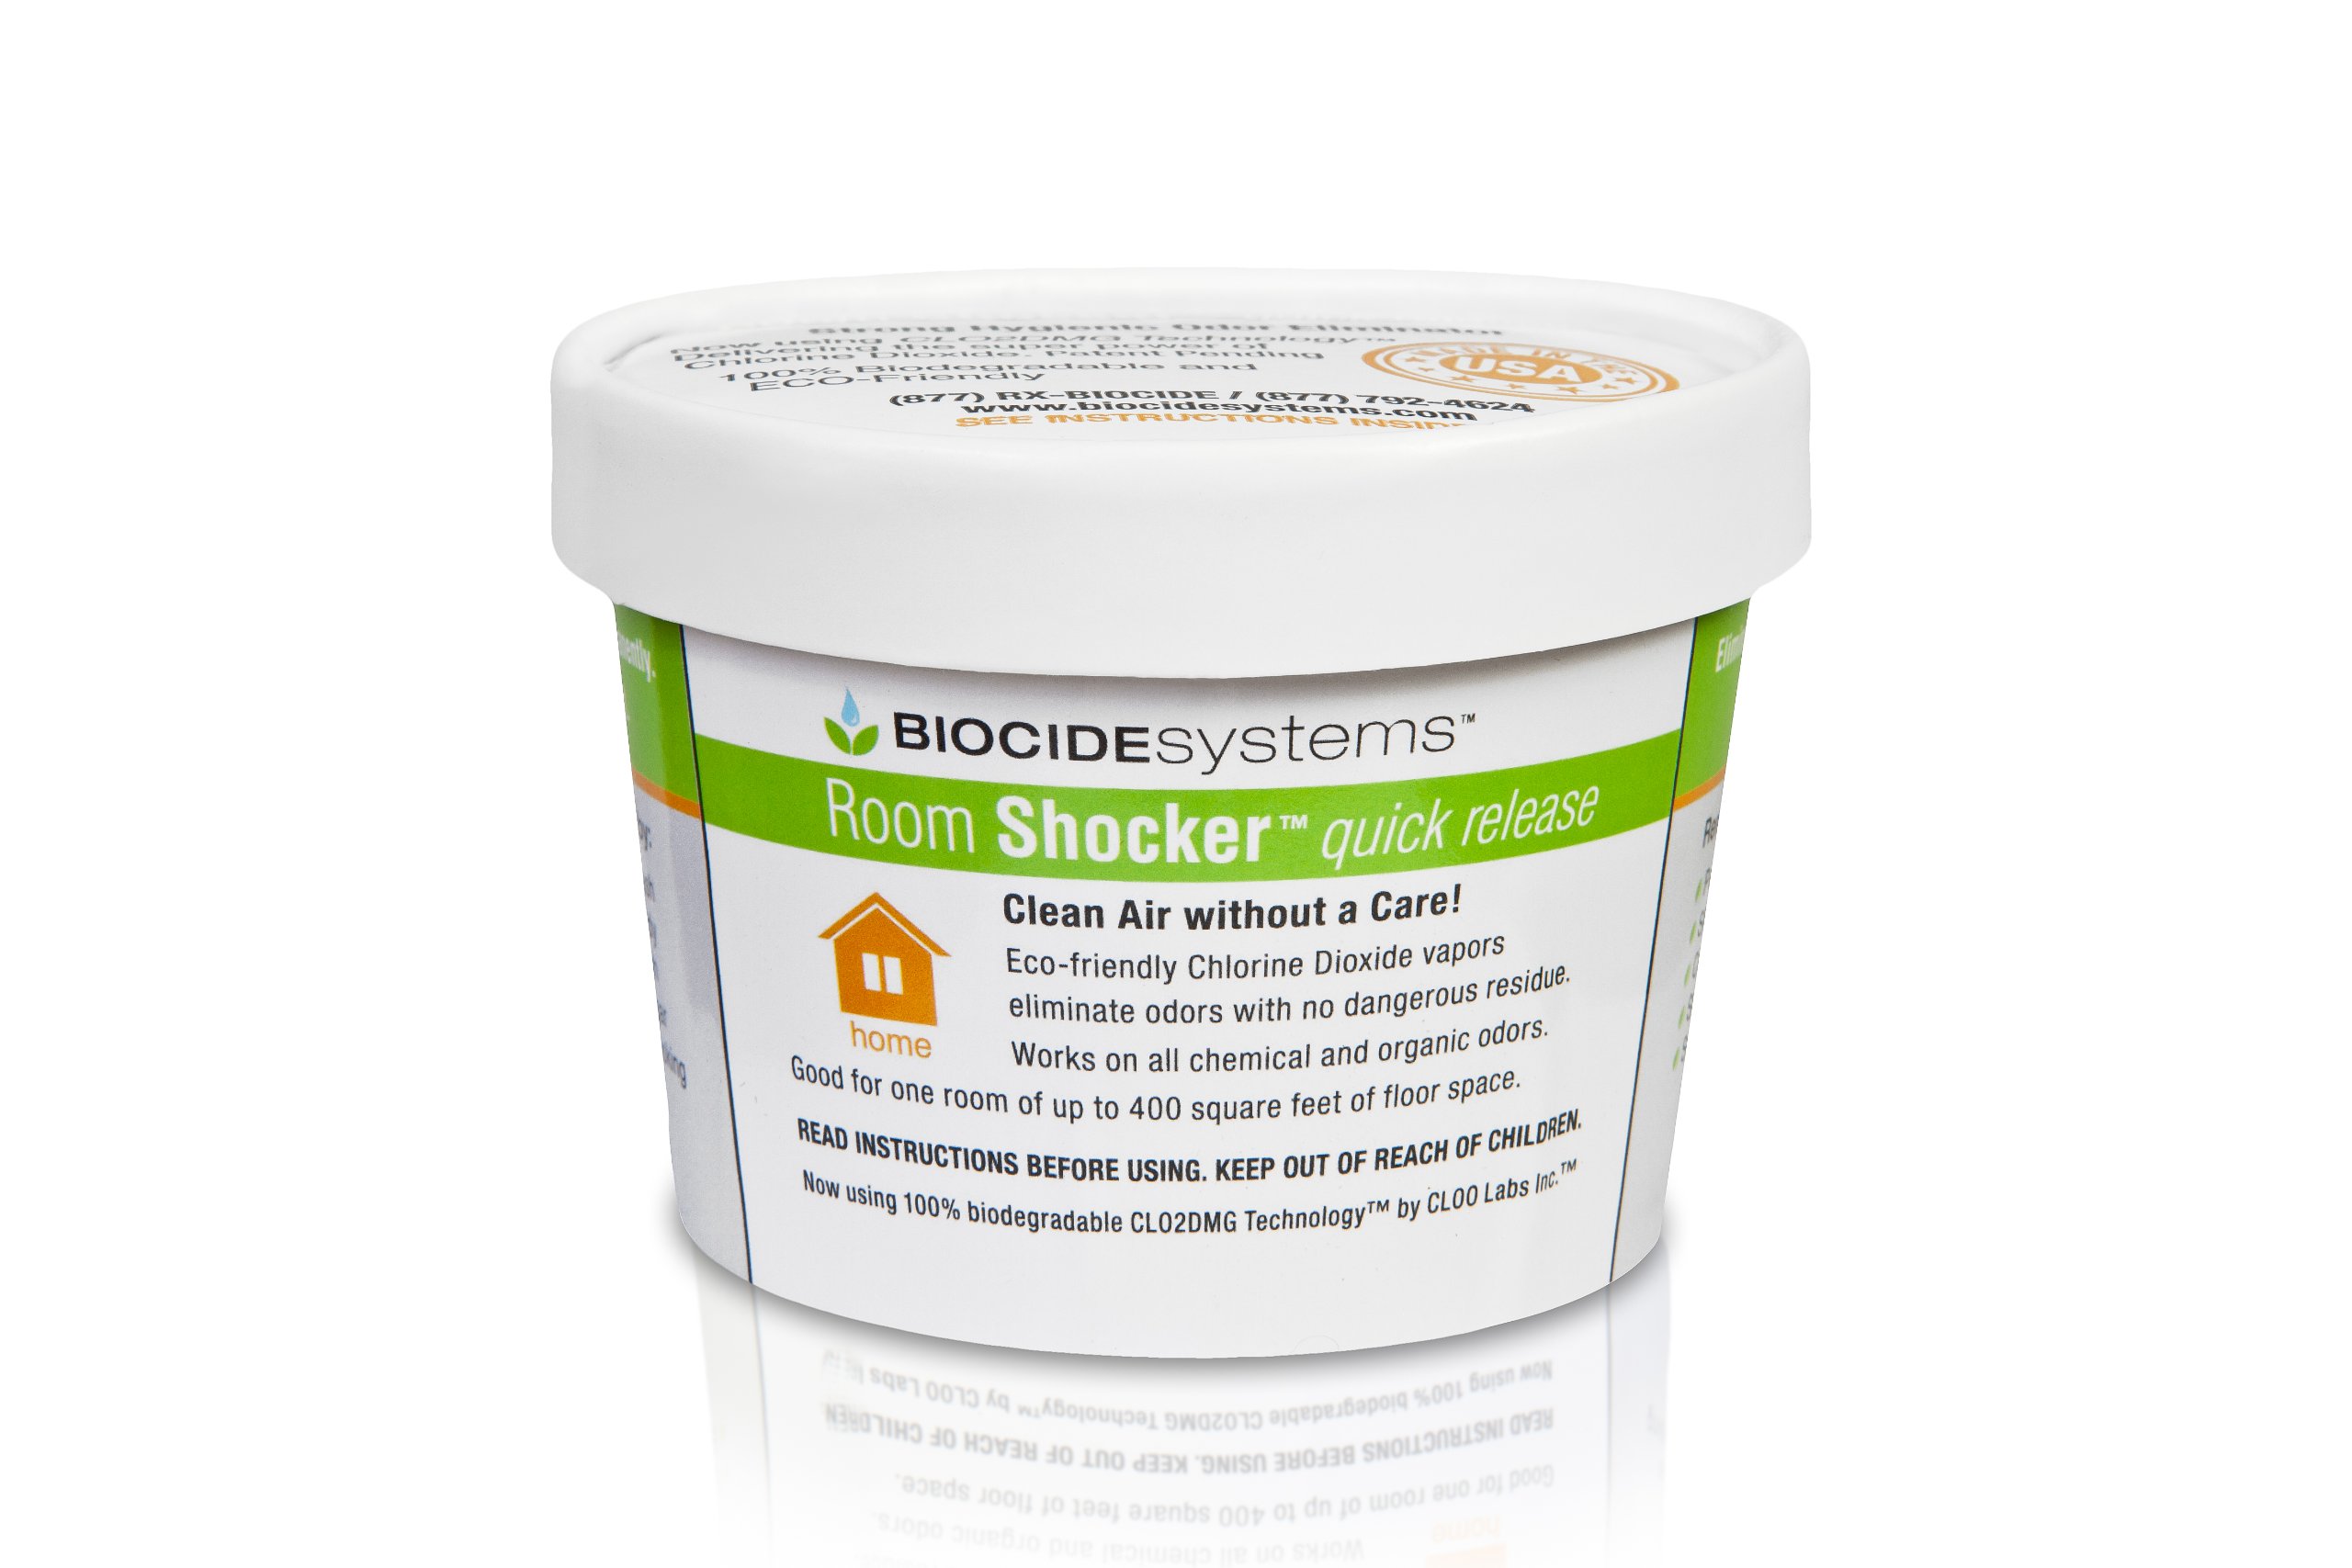 How To Use Biocide Room Shocker In My House Ventilation System